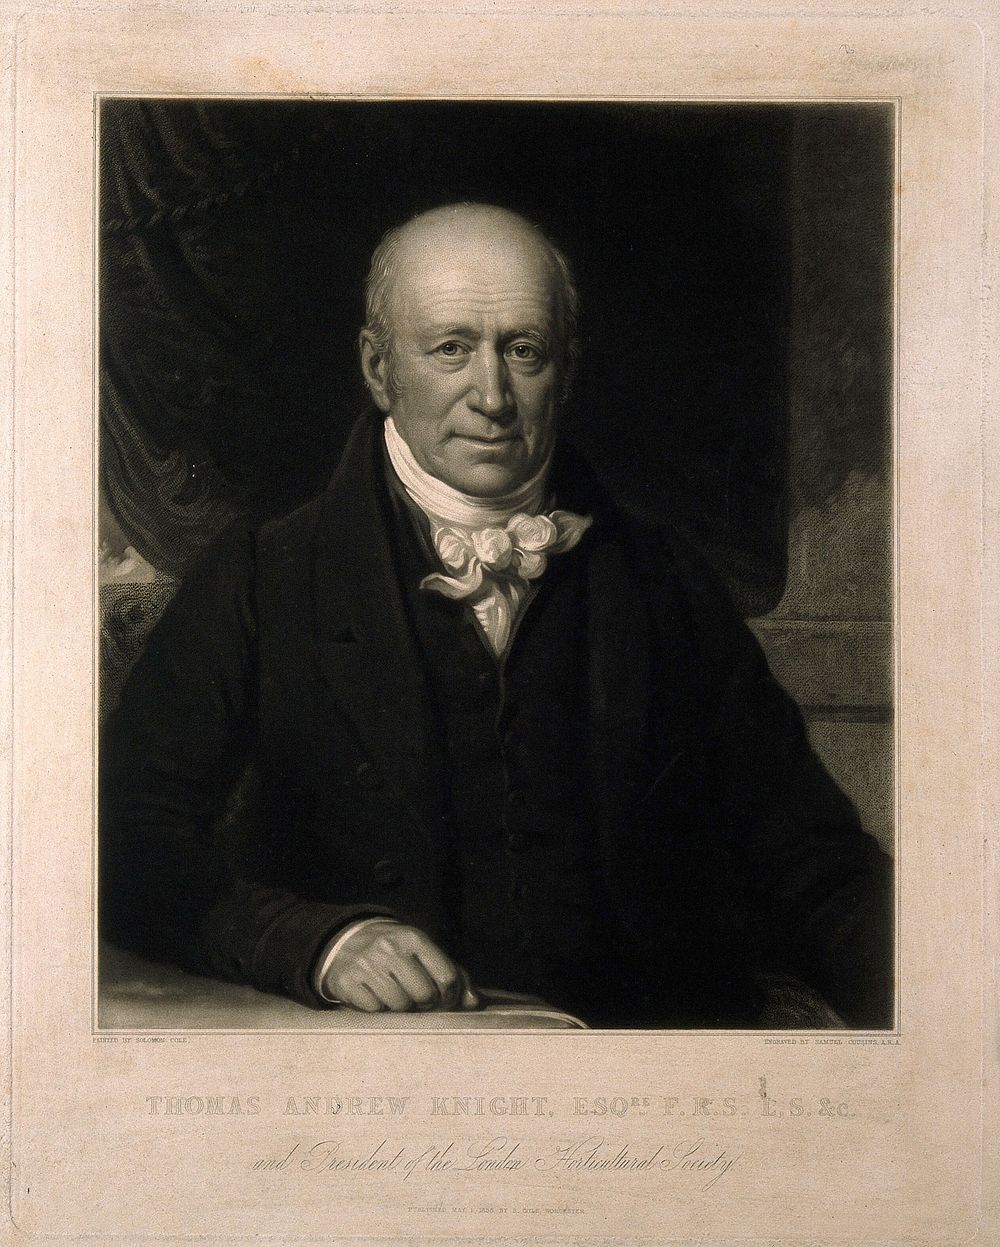 Thomas Andrew Knight. Mezzotint by S. Cousins, 1836, after S. Cole.